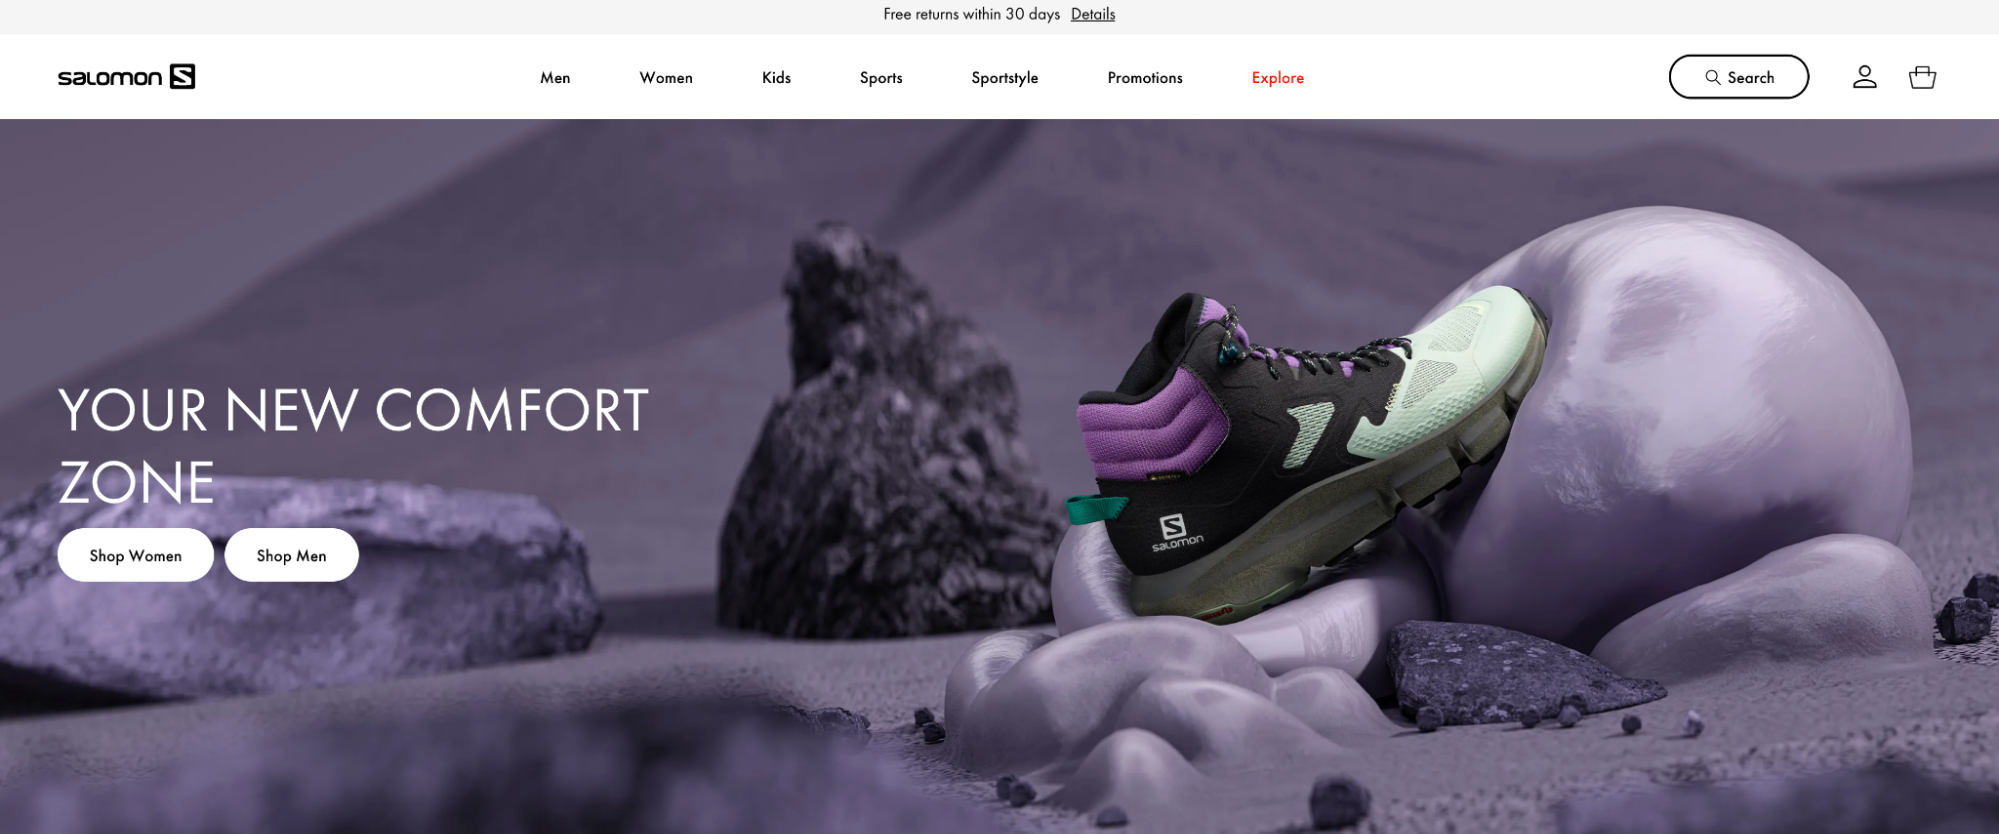 power of data: customer data remains at the heart of Salomon's eCommerce strategy